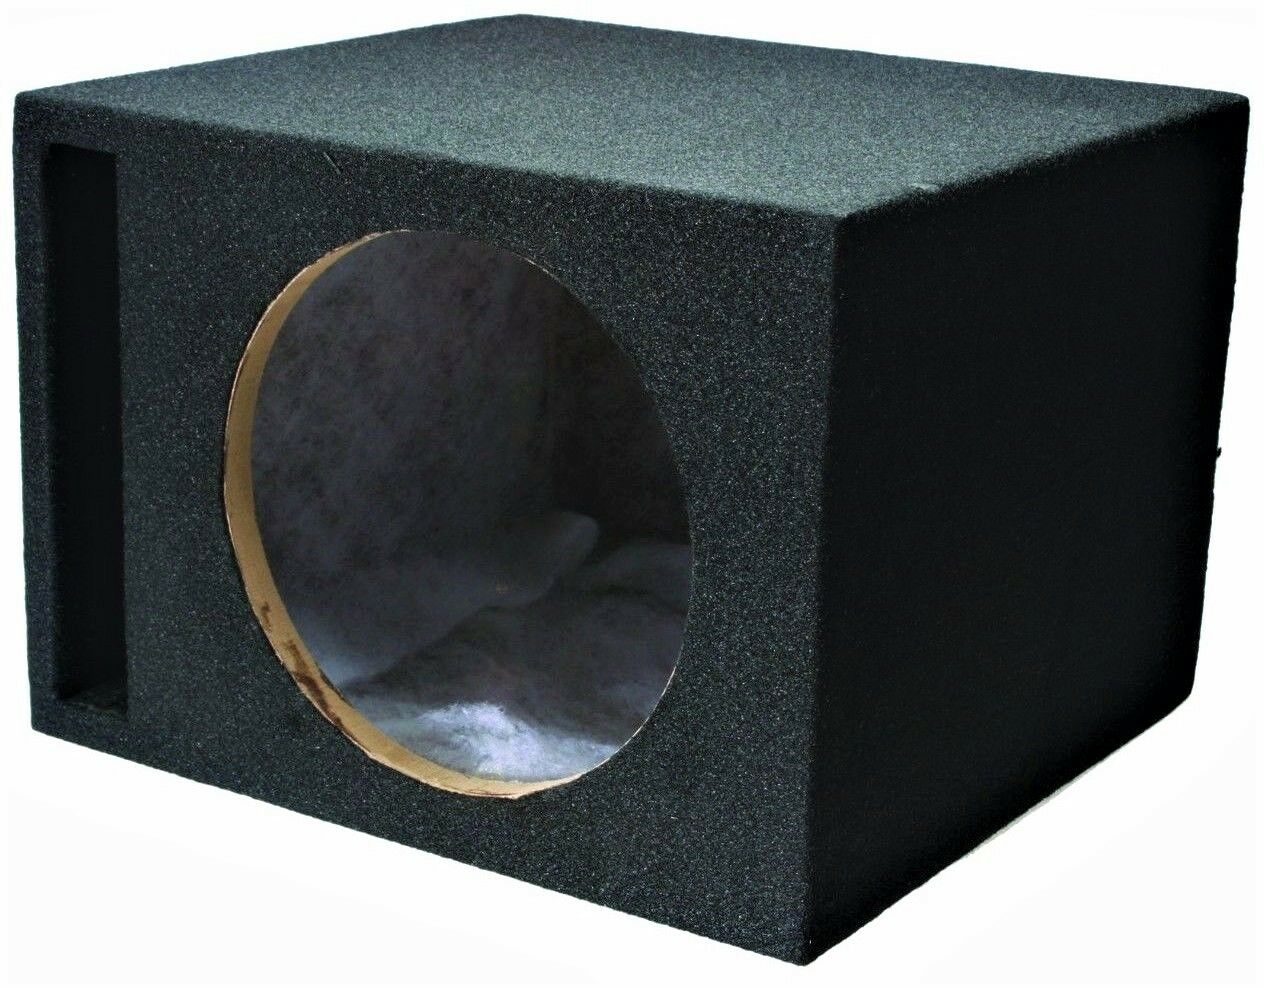 ABSOLUTE U.S.A VEGS12 <br/>Single 12" Vented Ported 3/4" MDF Car Subwoofer Enclosure Sub Box